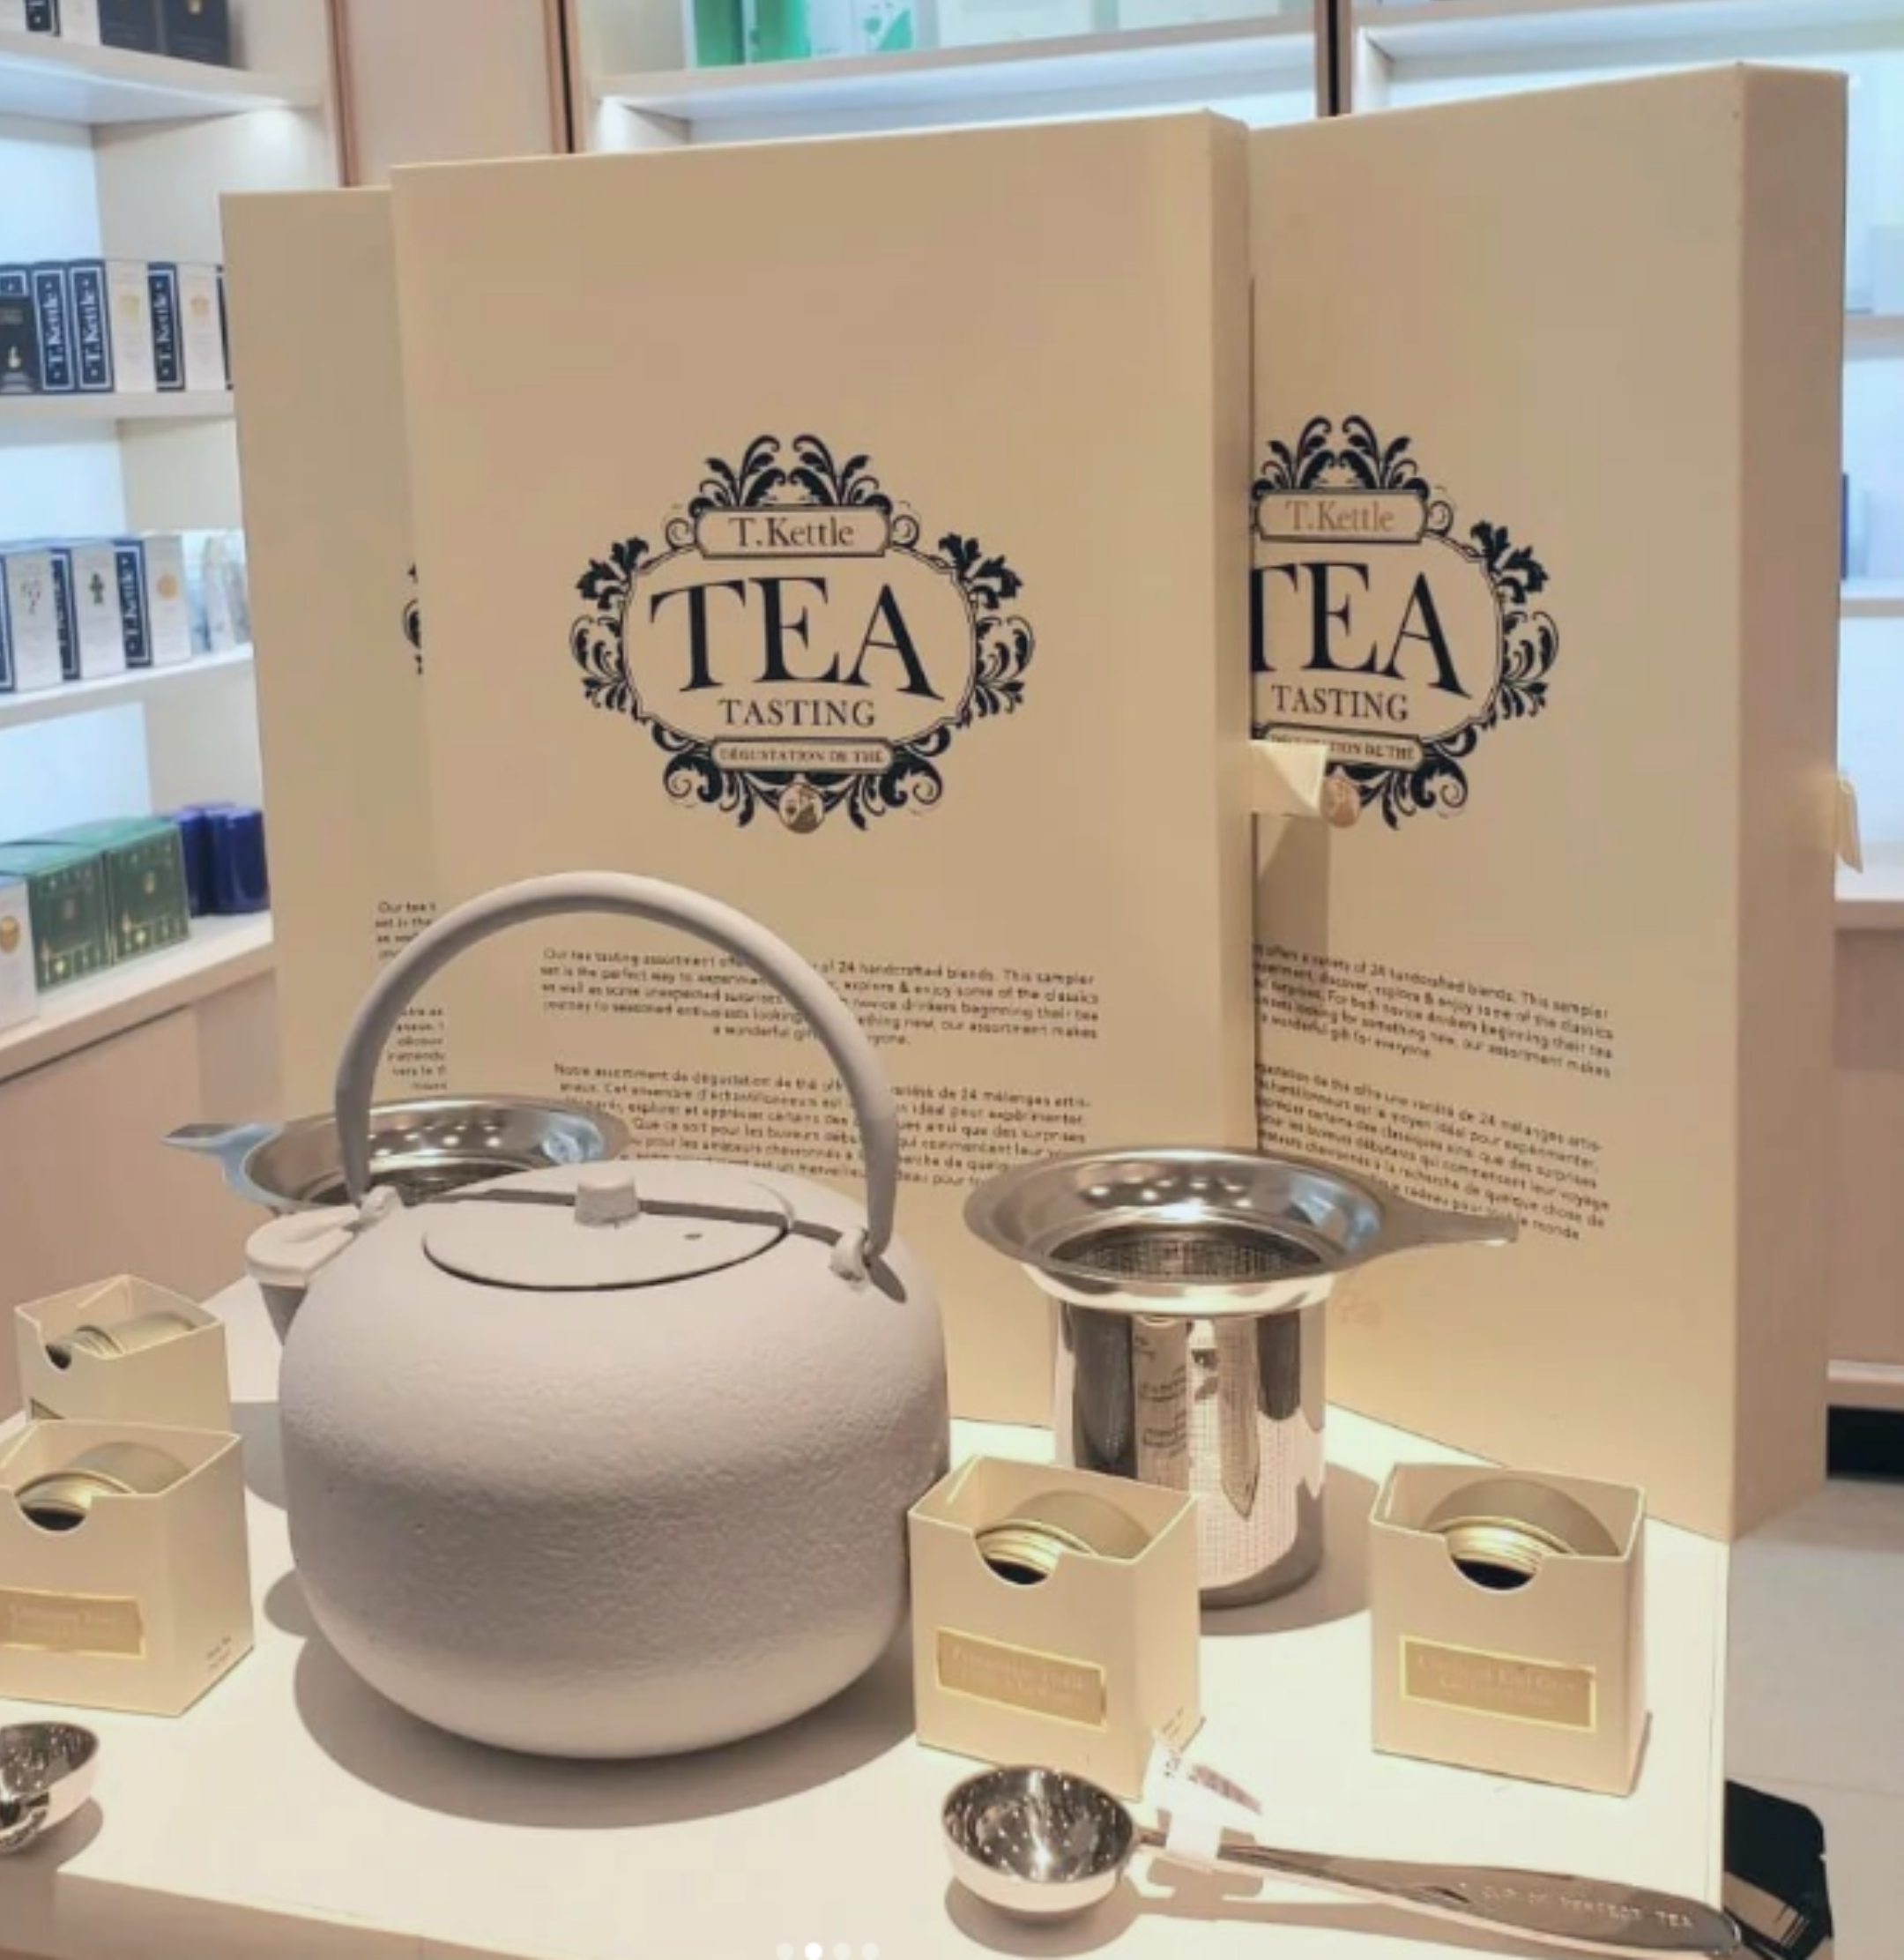 In Store T. Kettle Tea Sampler: T. Kettle Store Locations - Shop Premium Loose Leaf Tea Canada and North America